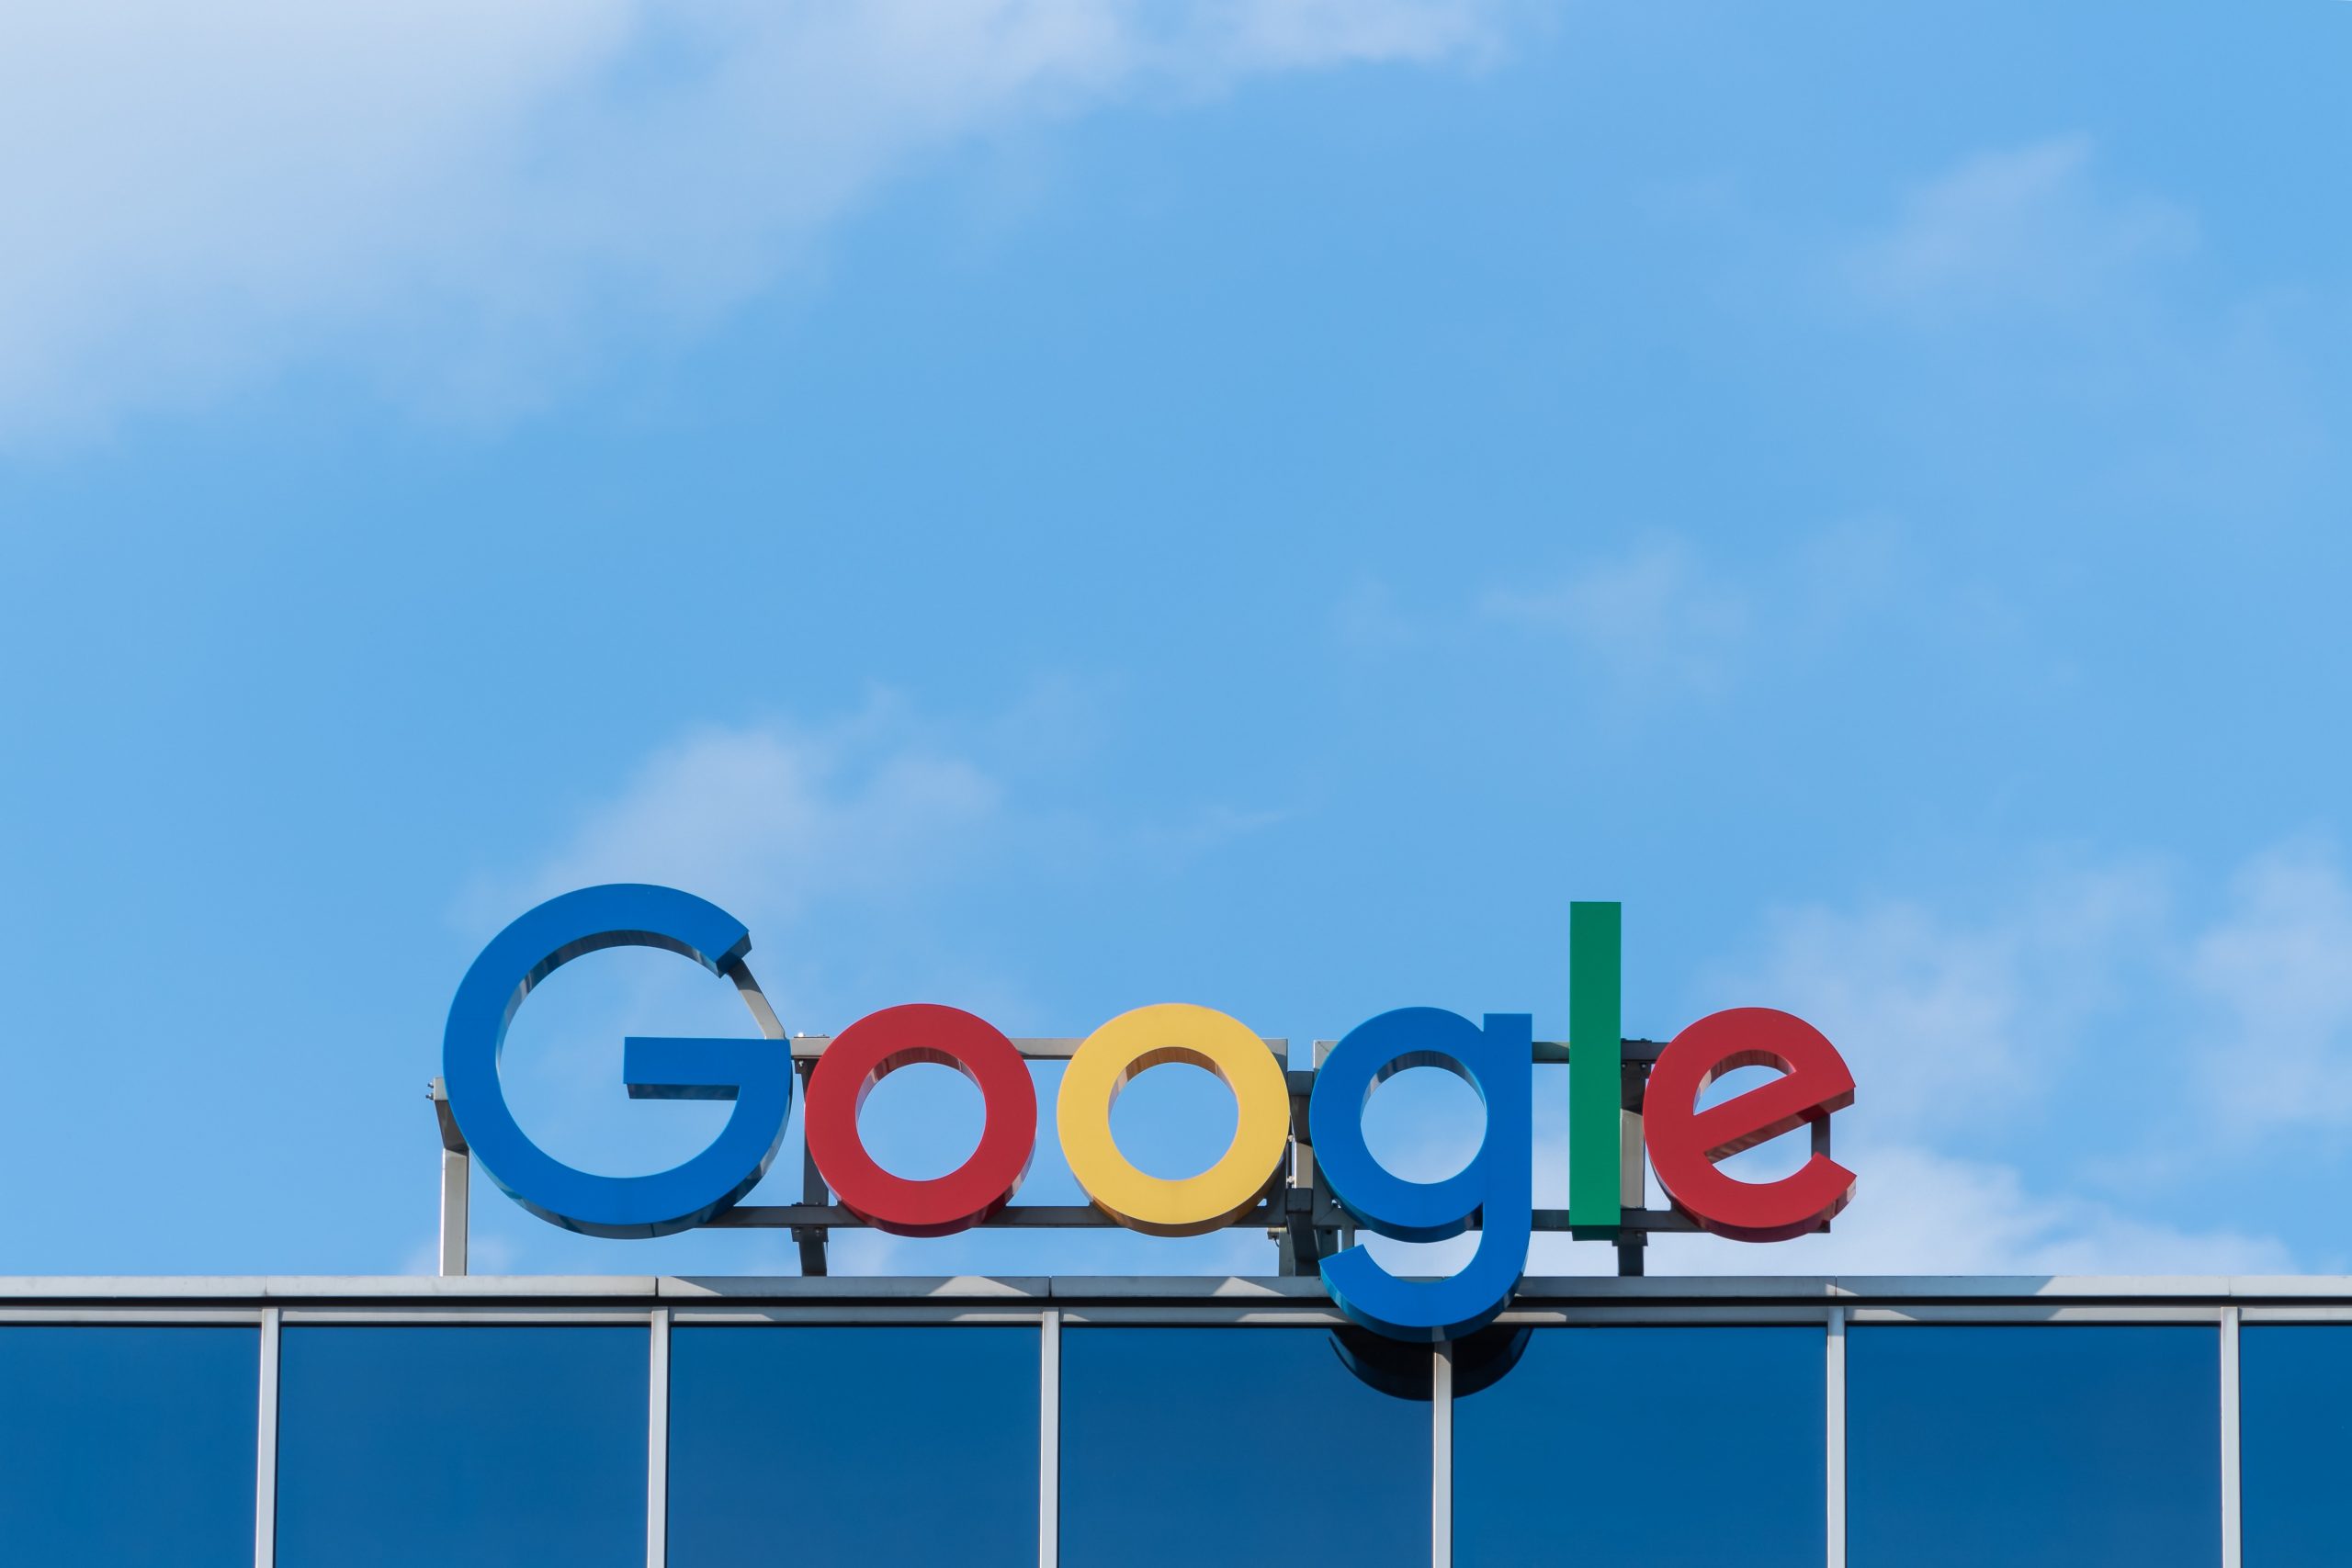 Google to invest RM9.4 bil in M’sia, leading to over RM15.04 bil in positive economic impact